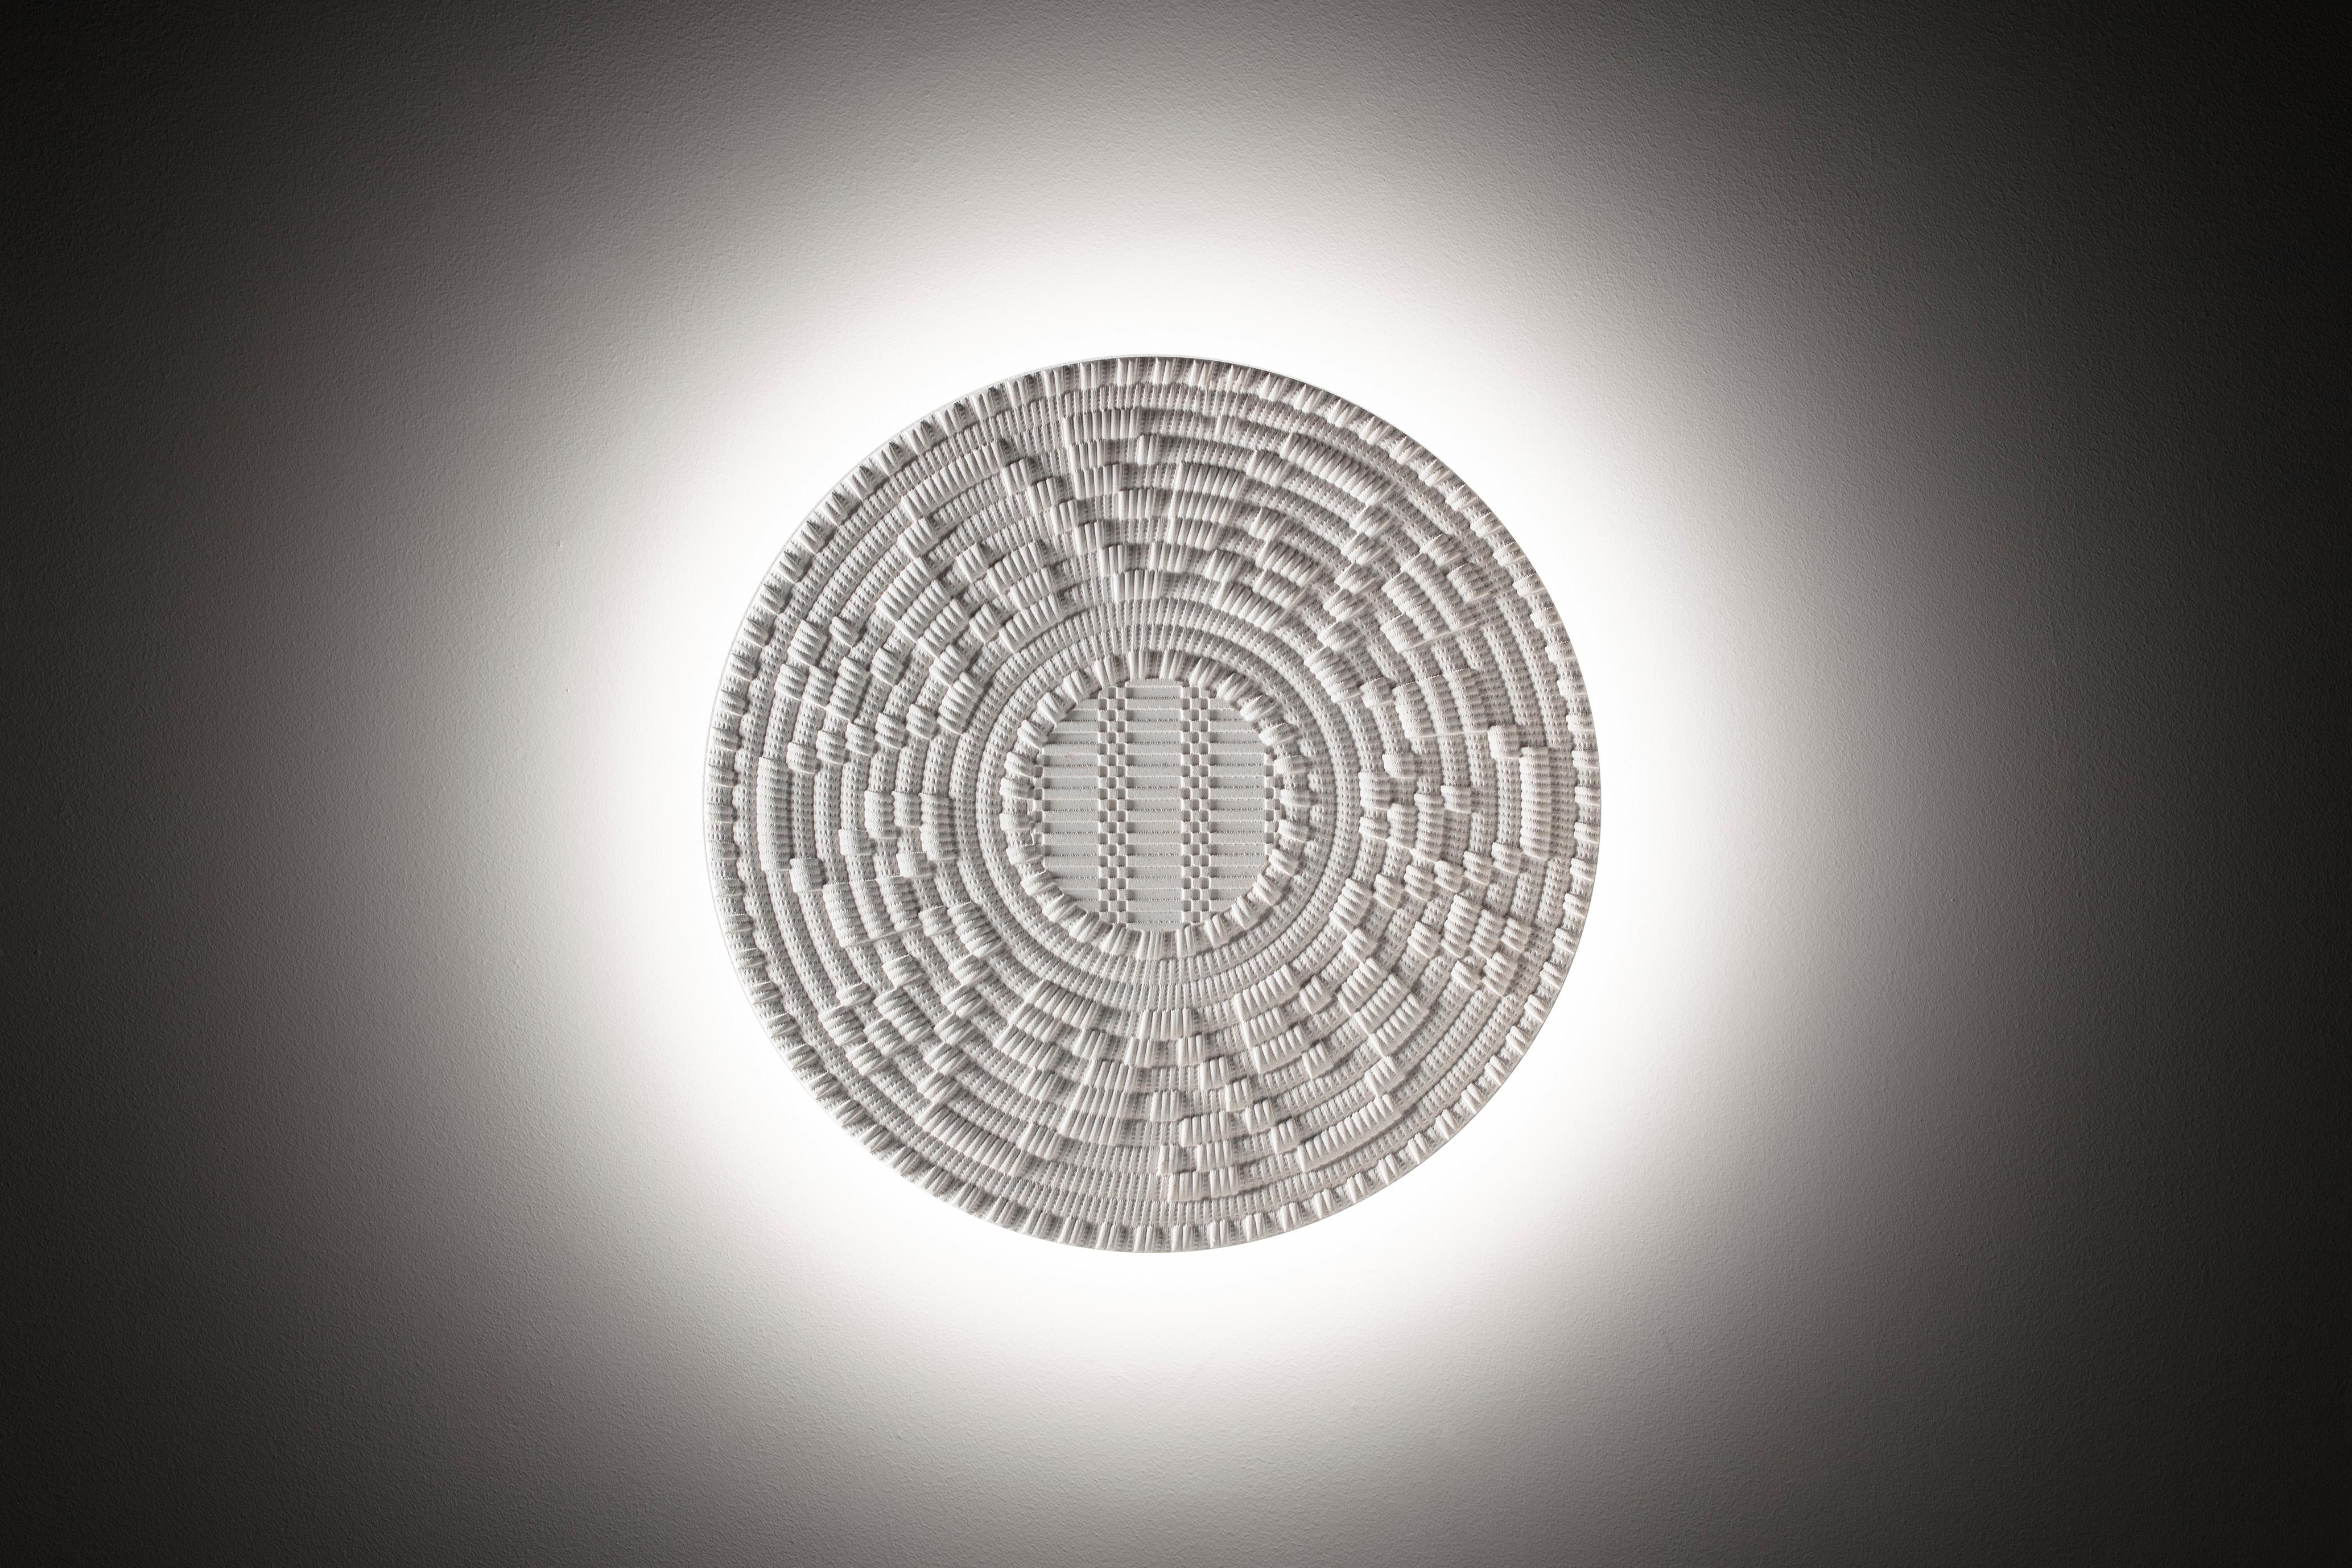 Corbulas 90
This superb, three-dimensional round panel is fashioned of Bianco Diocleziano marble. The pattern reproduced on the surface evokes the elaborate underside of traditional Sardinian baskets, used to hold and measure flour as well as